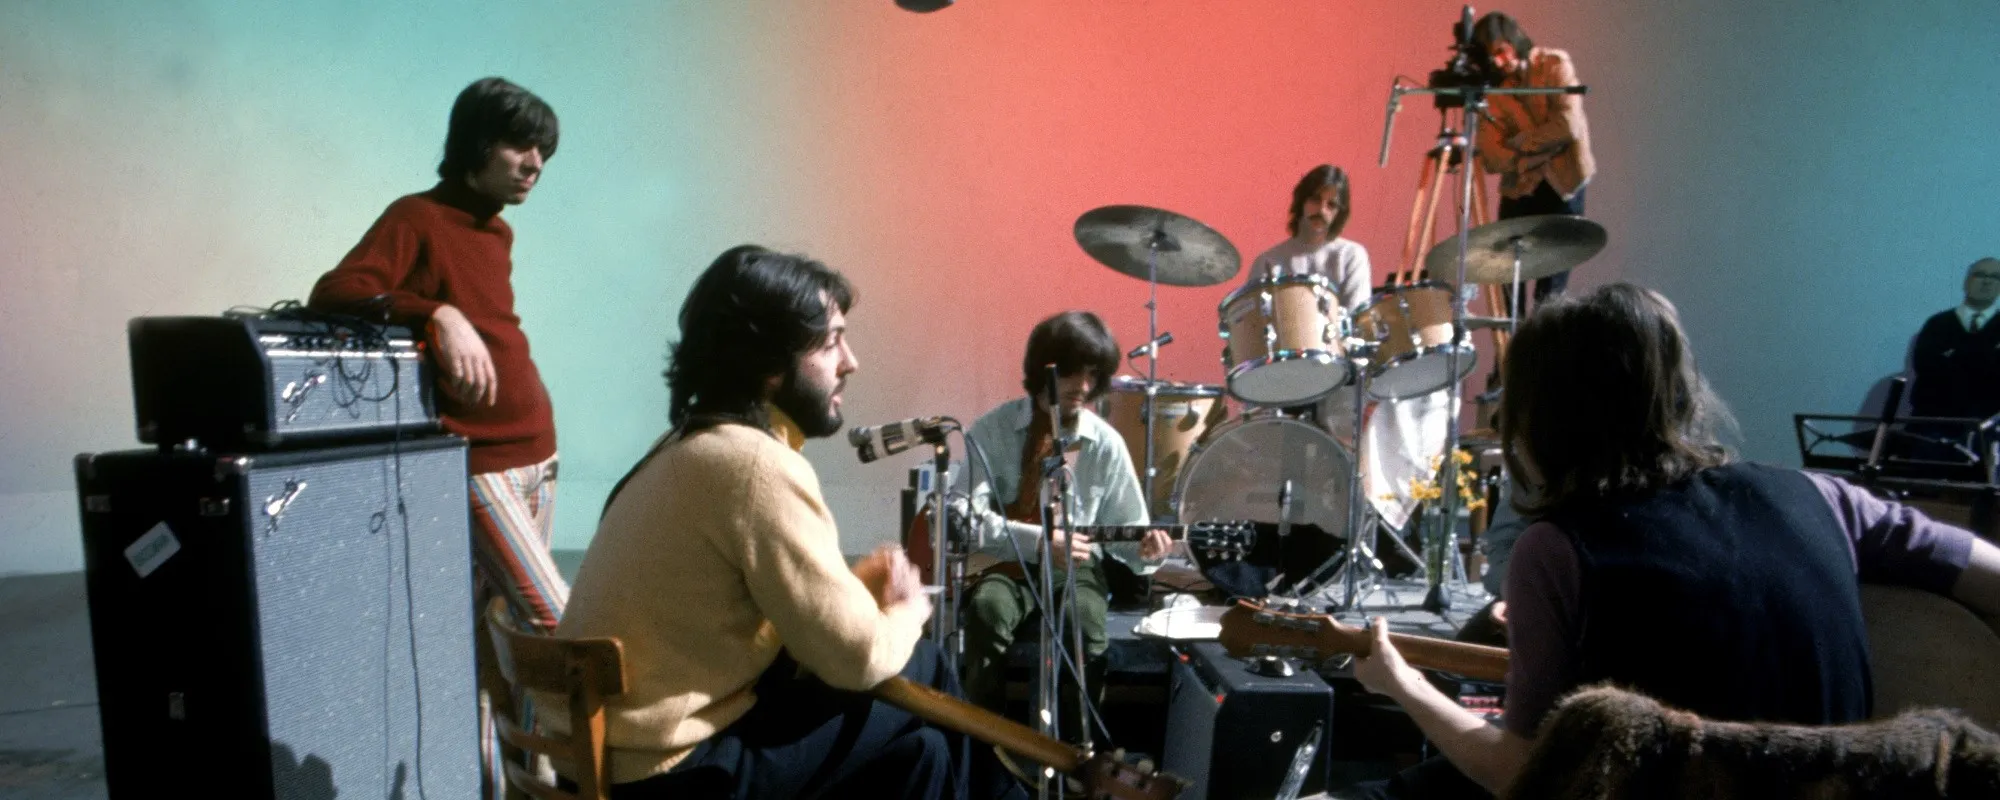 ‘Let It Be’ Director Says the Restored Version of the 1970 Beatles Documentary “Really Looks Beautiful”